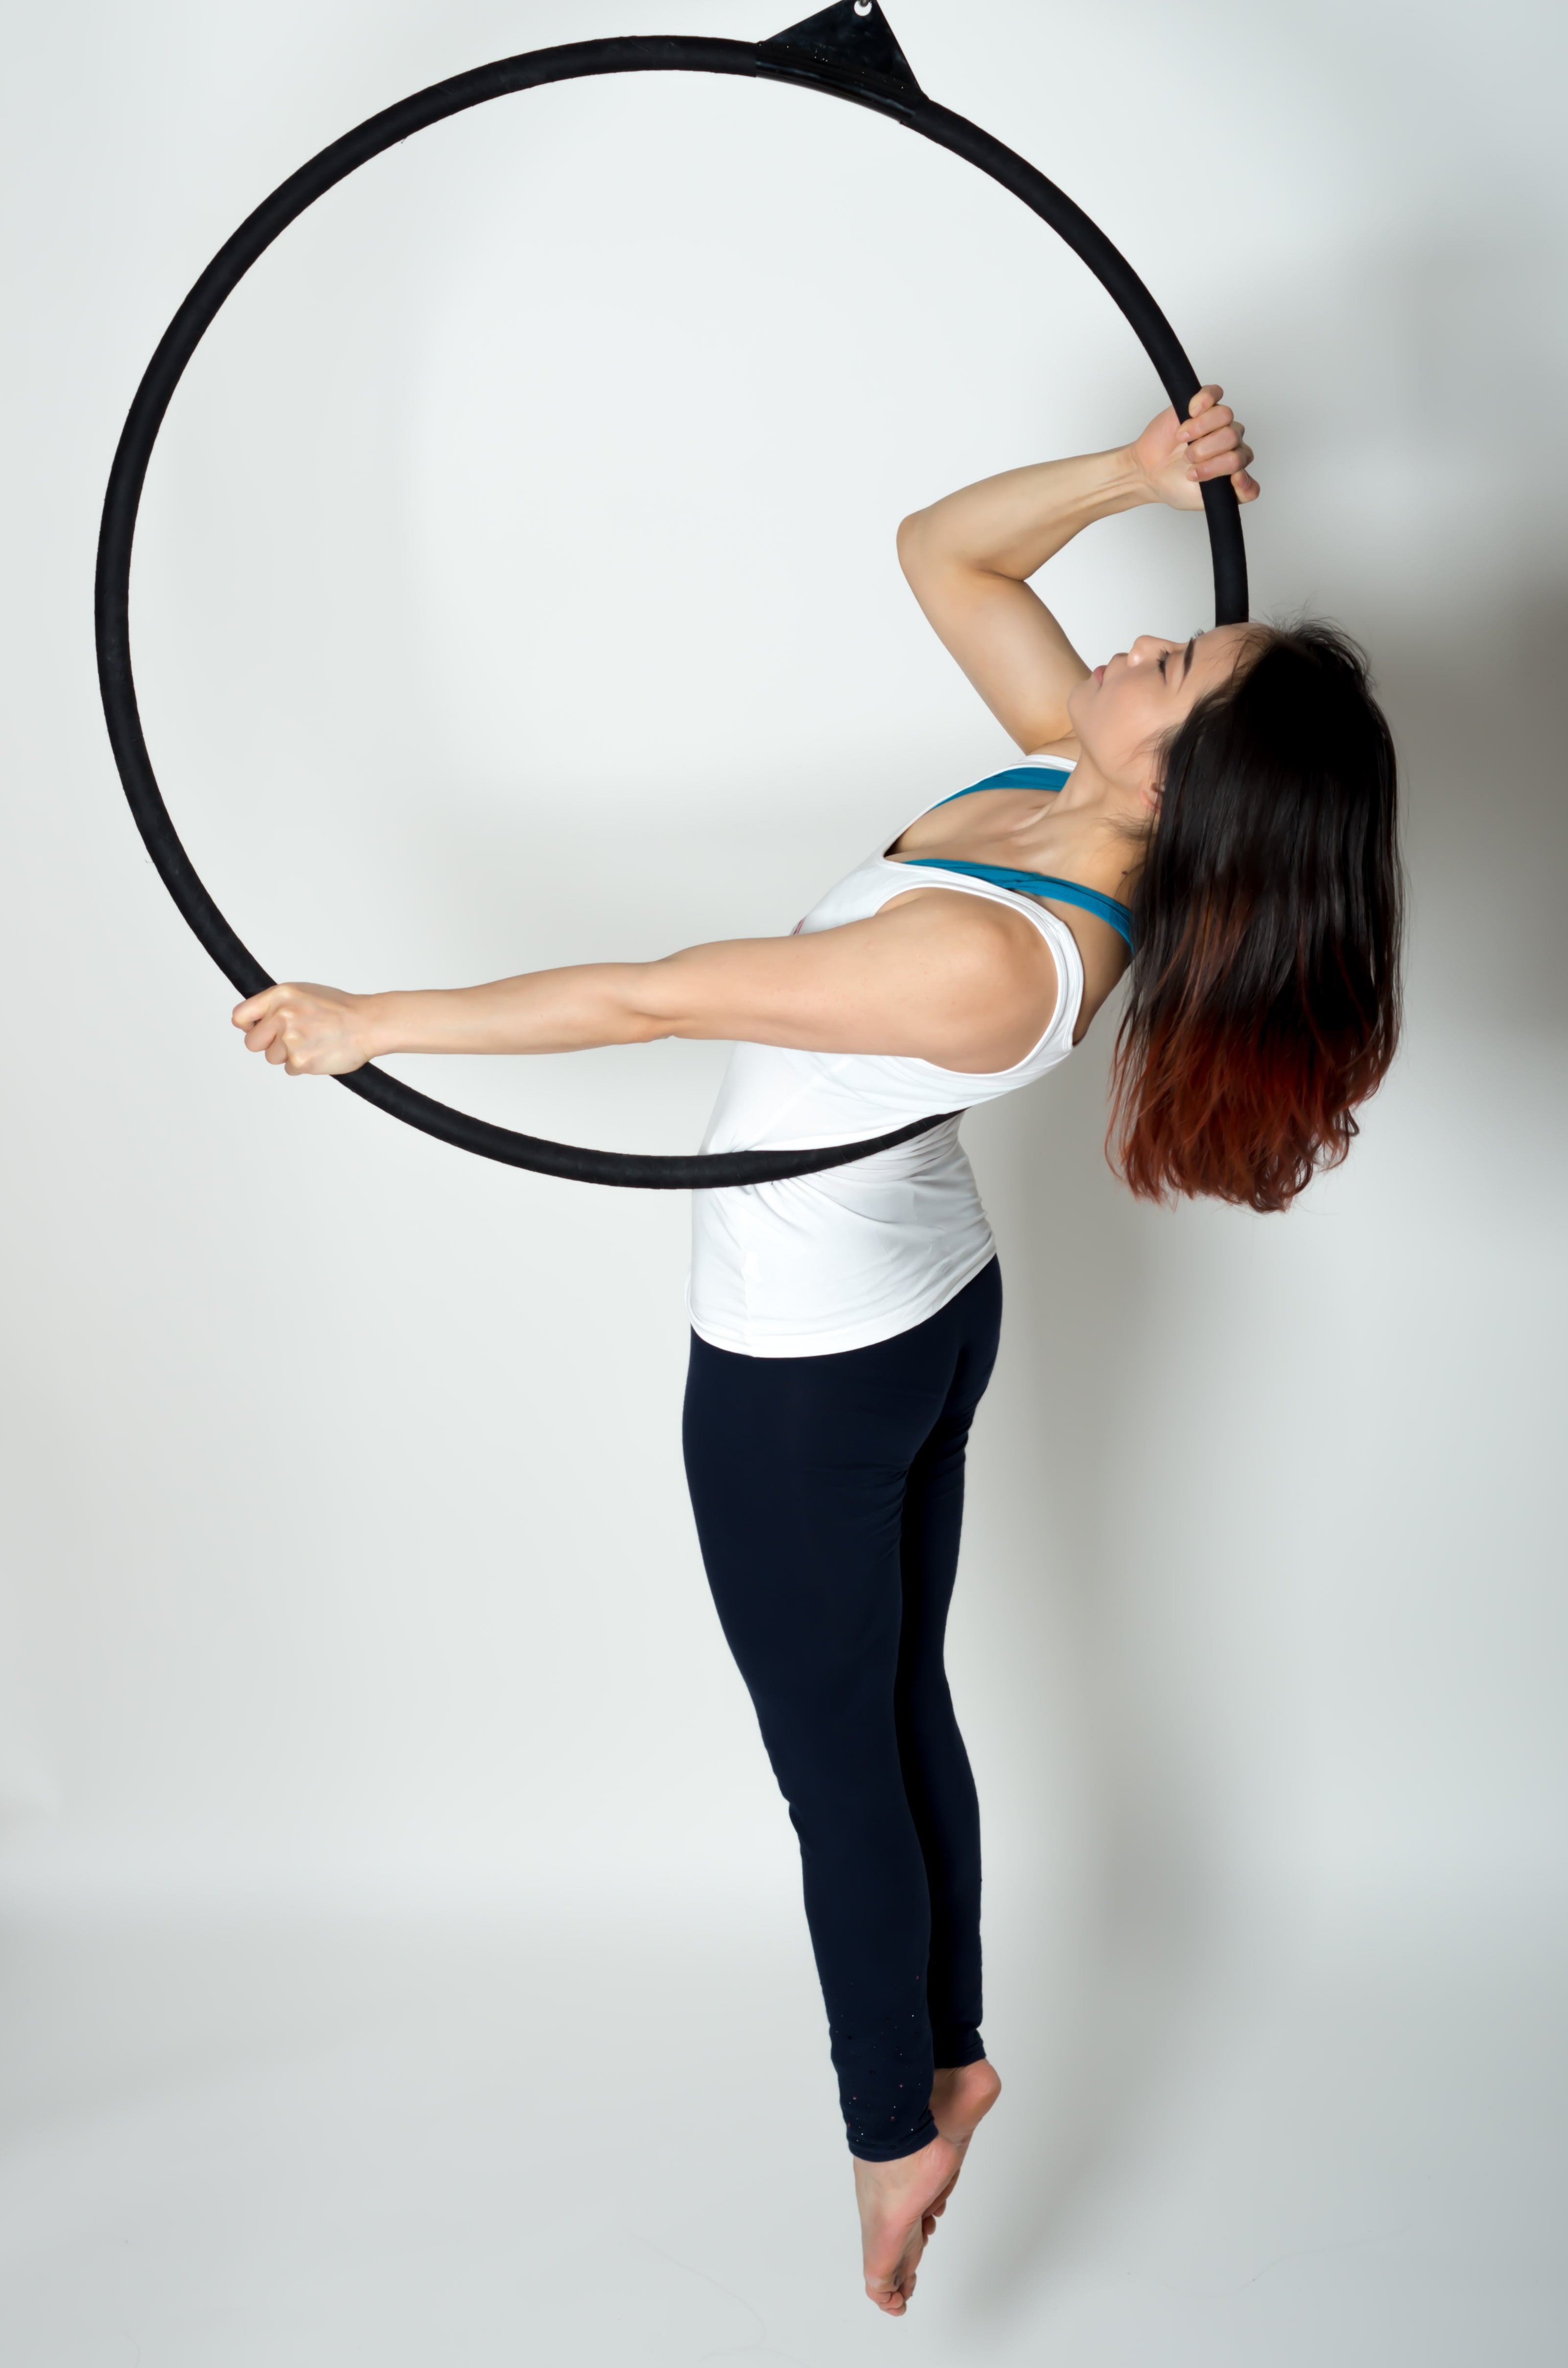 Pin by Shaina on Fitness | Aerial hoop moves, Aerial hoop, Aerial dance